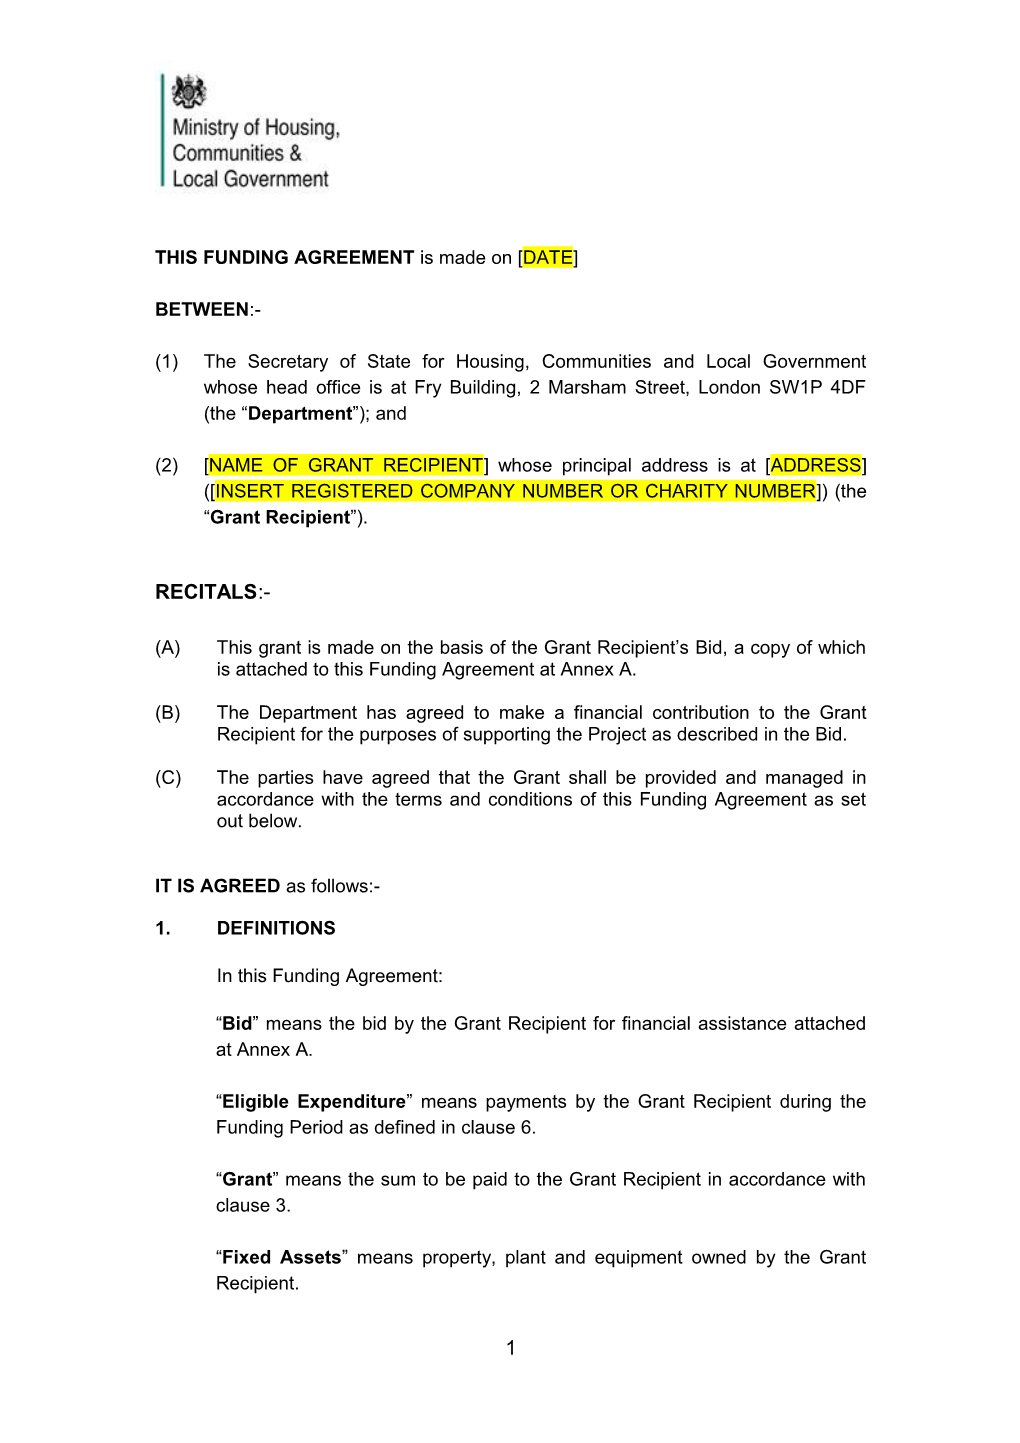 Dclg Grant Funding Agreement Template